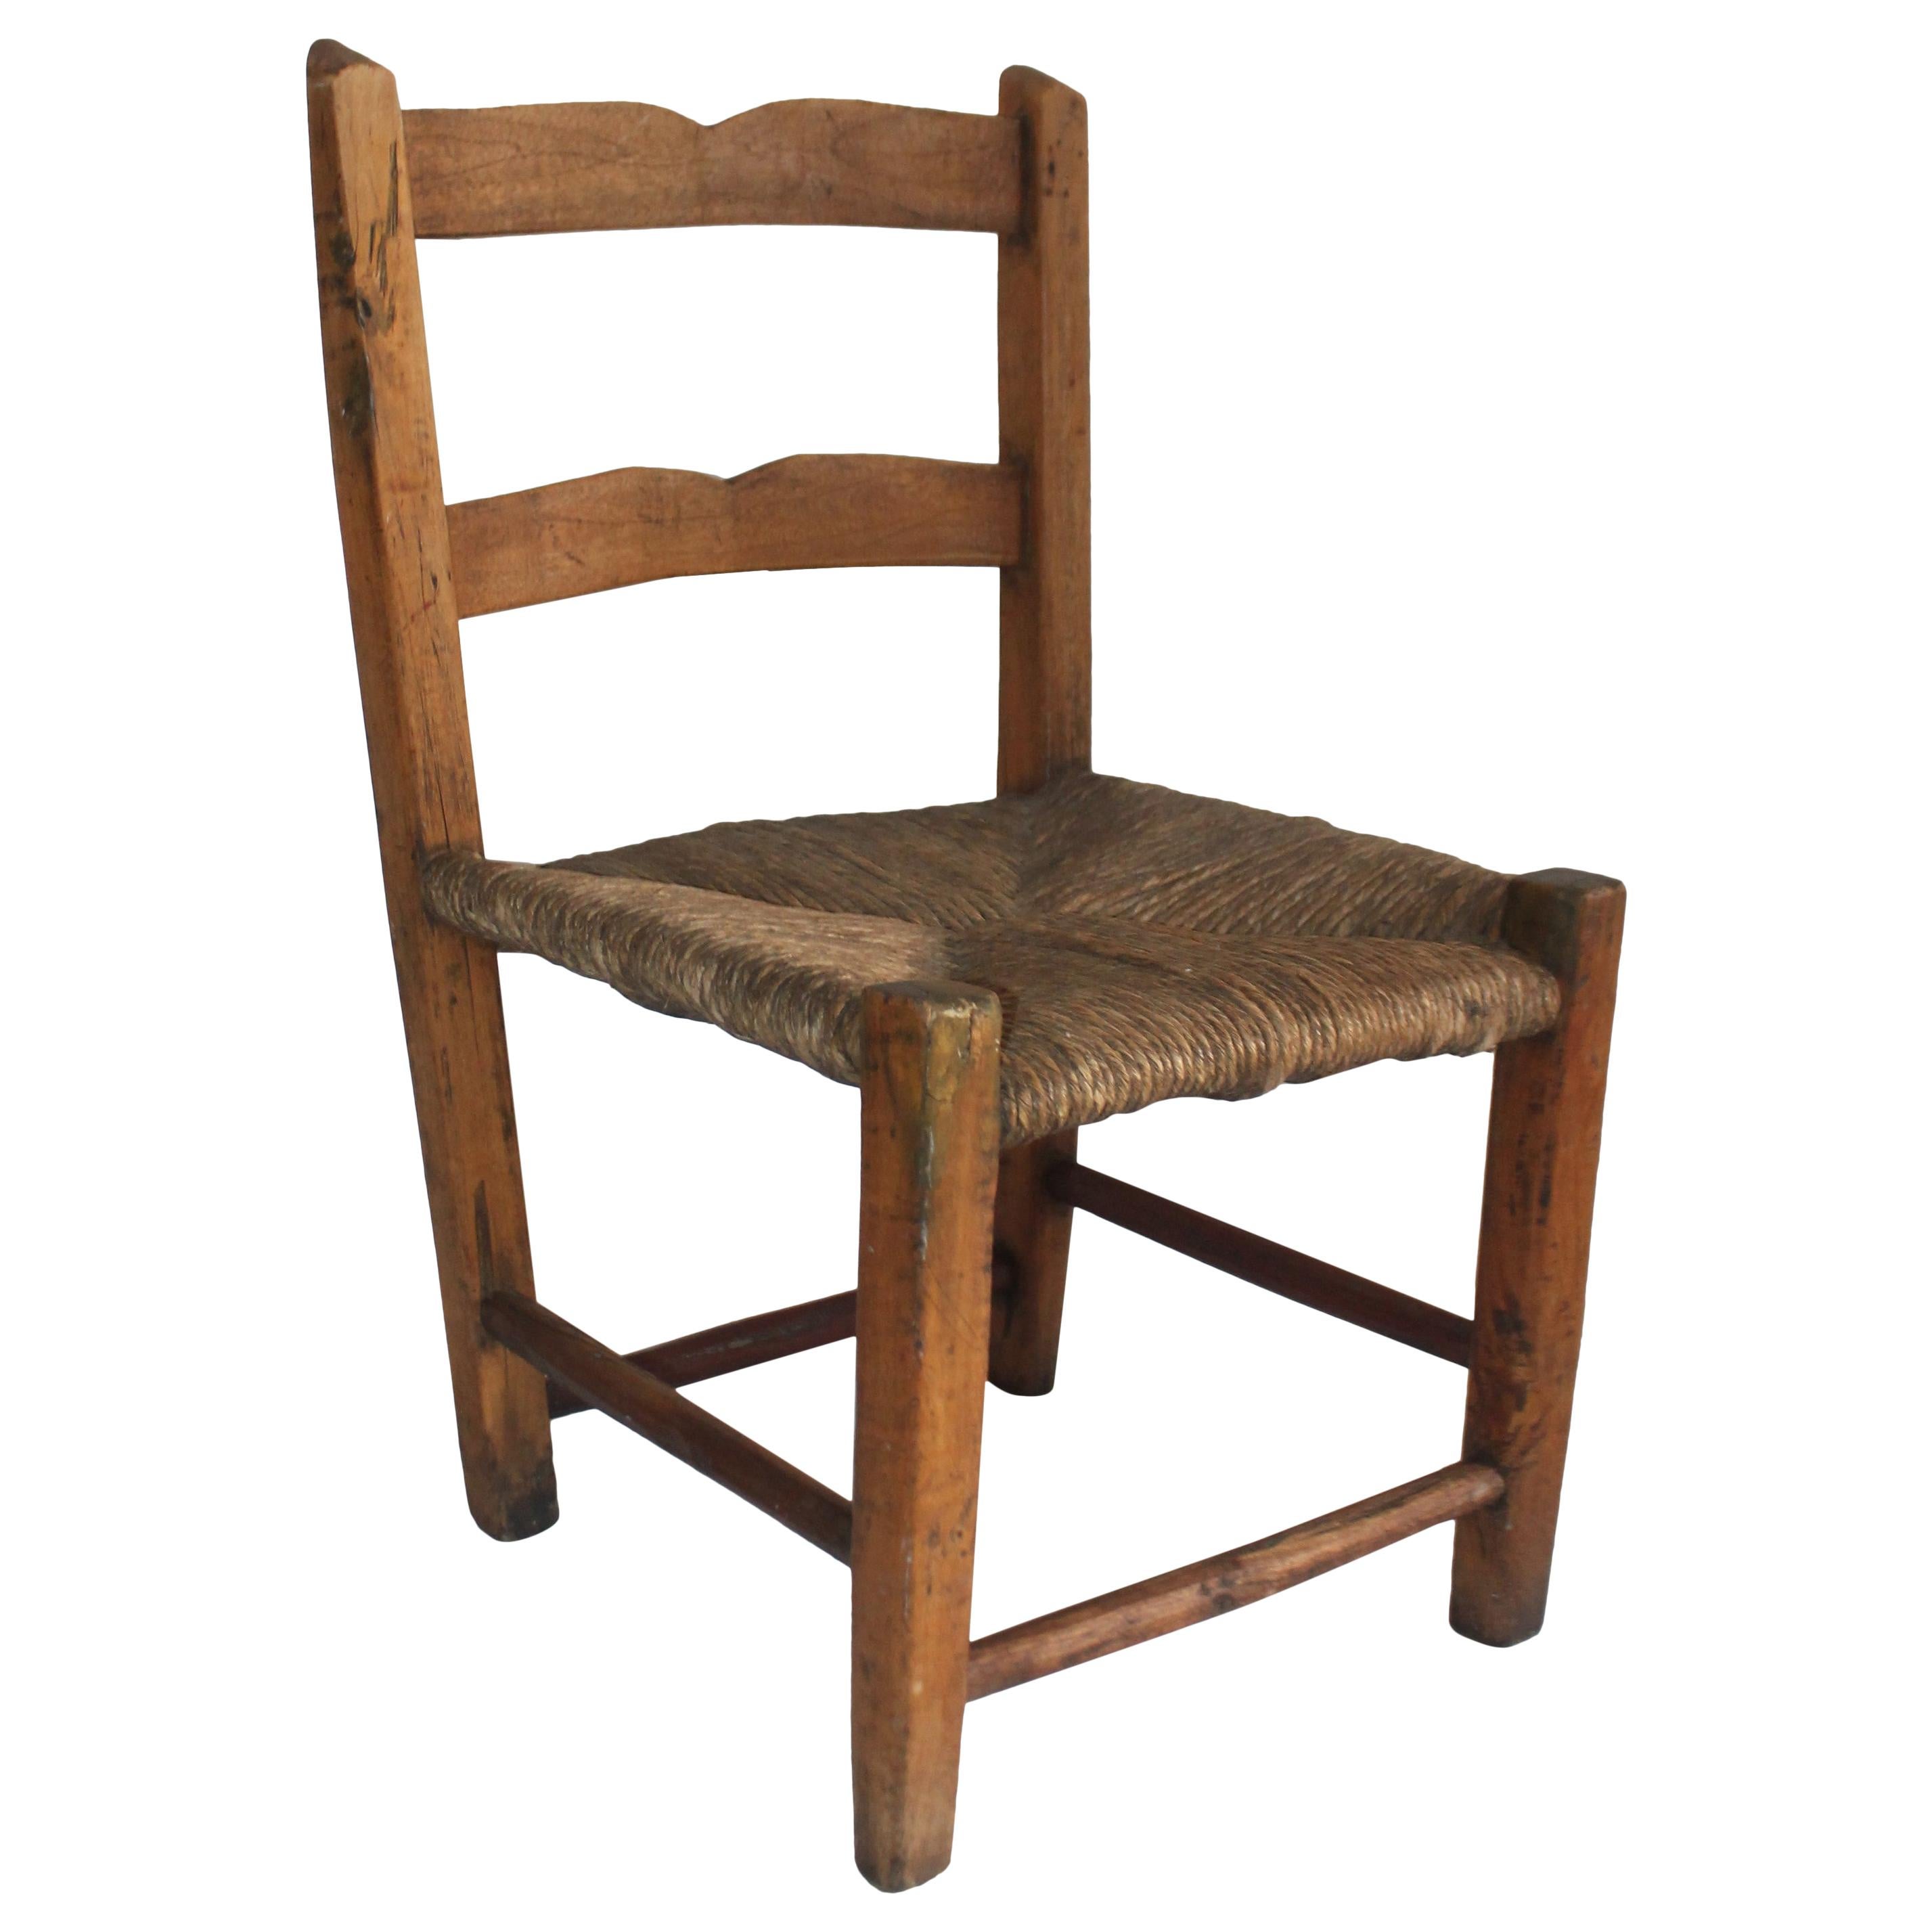 Early 19th Century Child's Chair with Original Rush Seat